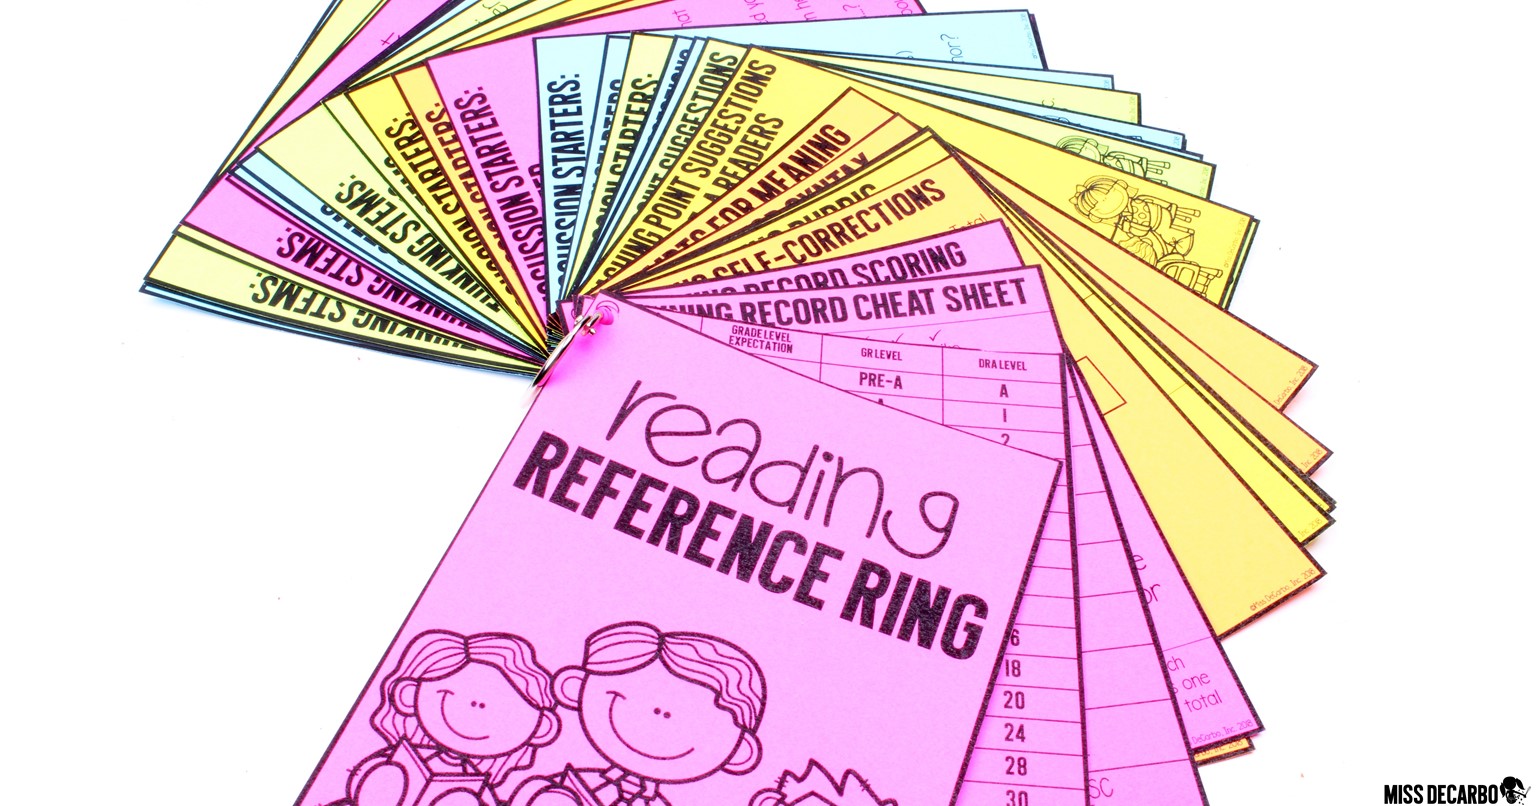 This reading reference ring contains running record cheat sheets, discussion questions, thinking stems, and more for the small group table!